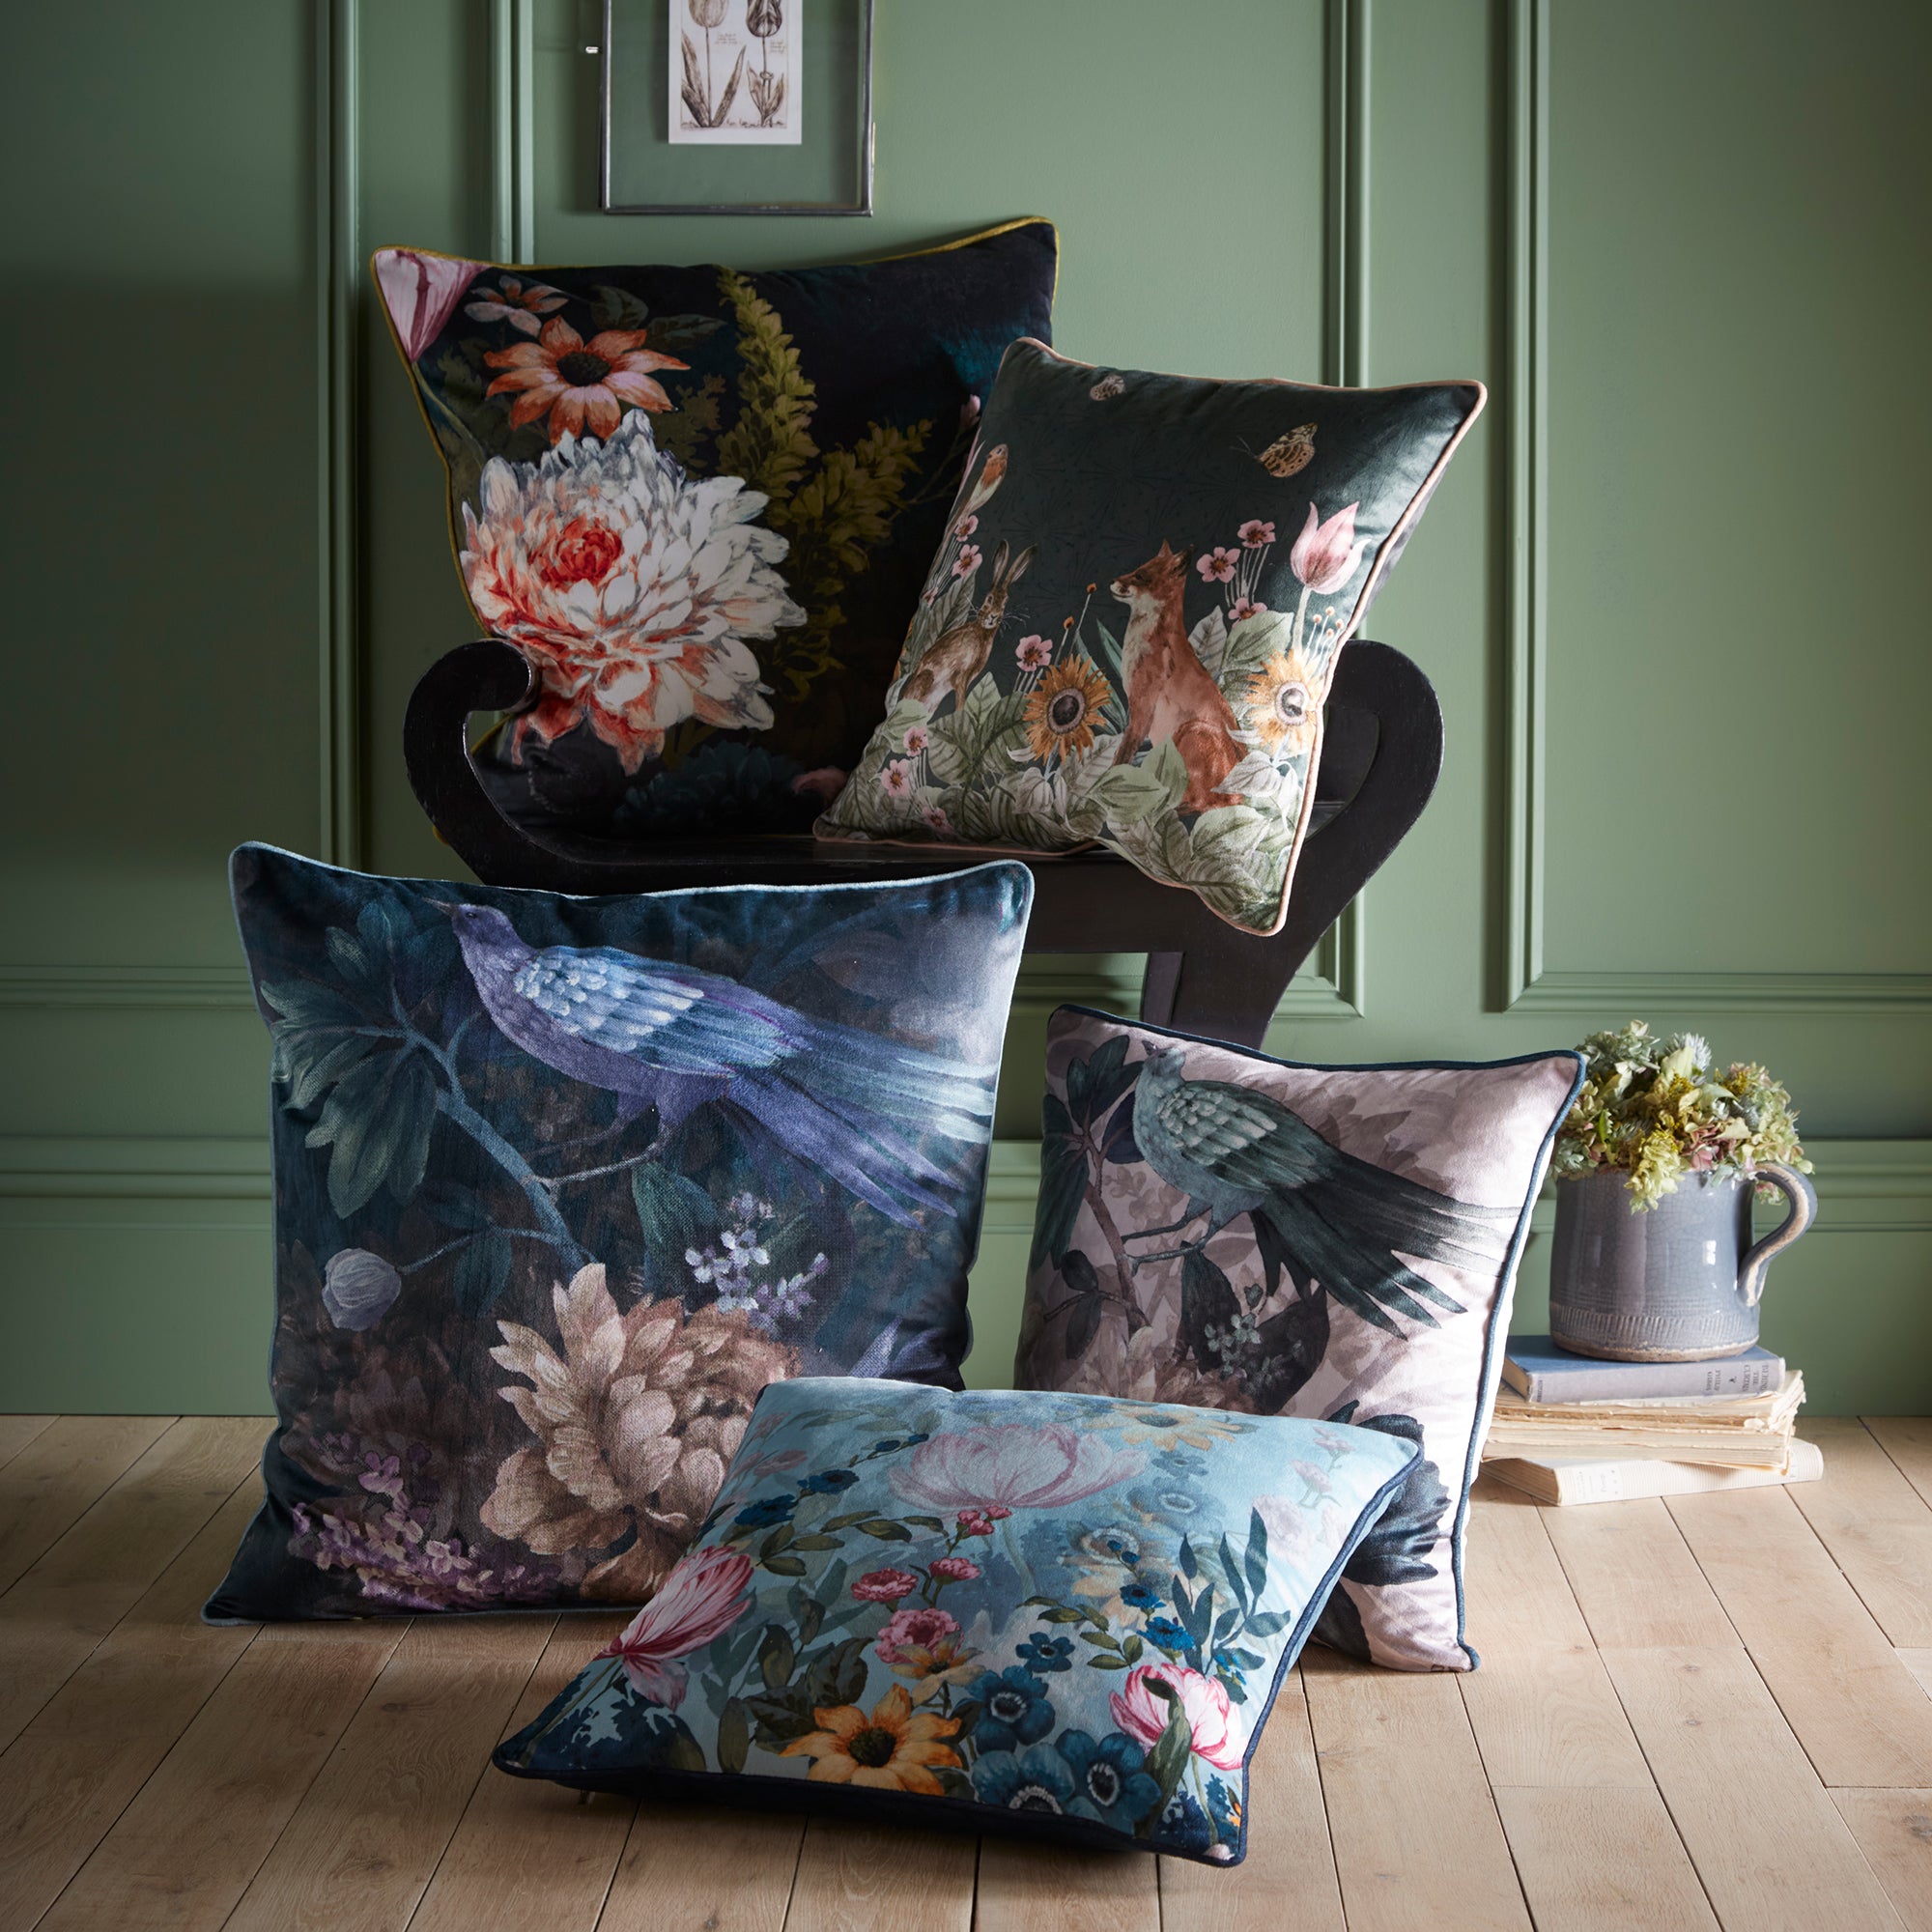 Cushion Cover Kennington by Appletree Heritage in Multi